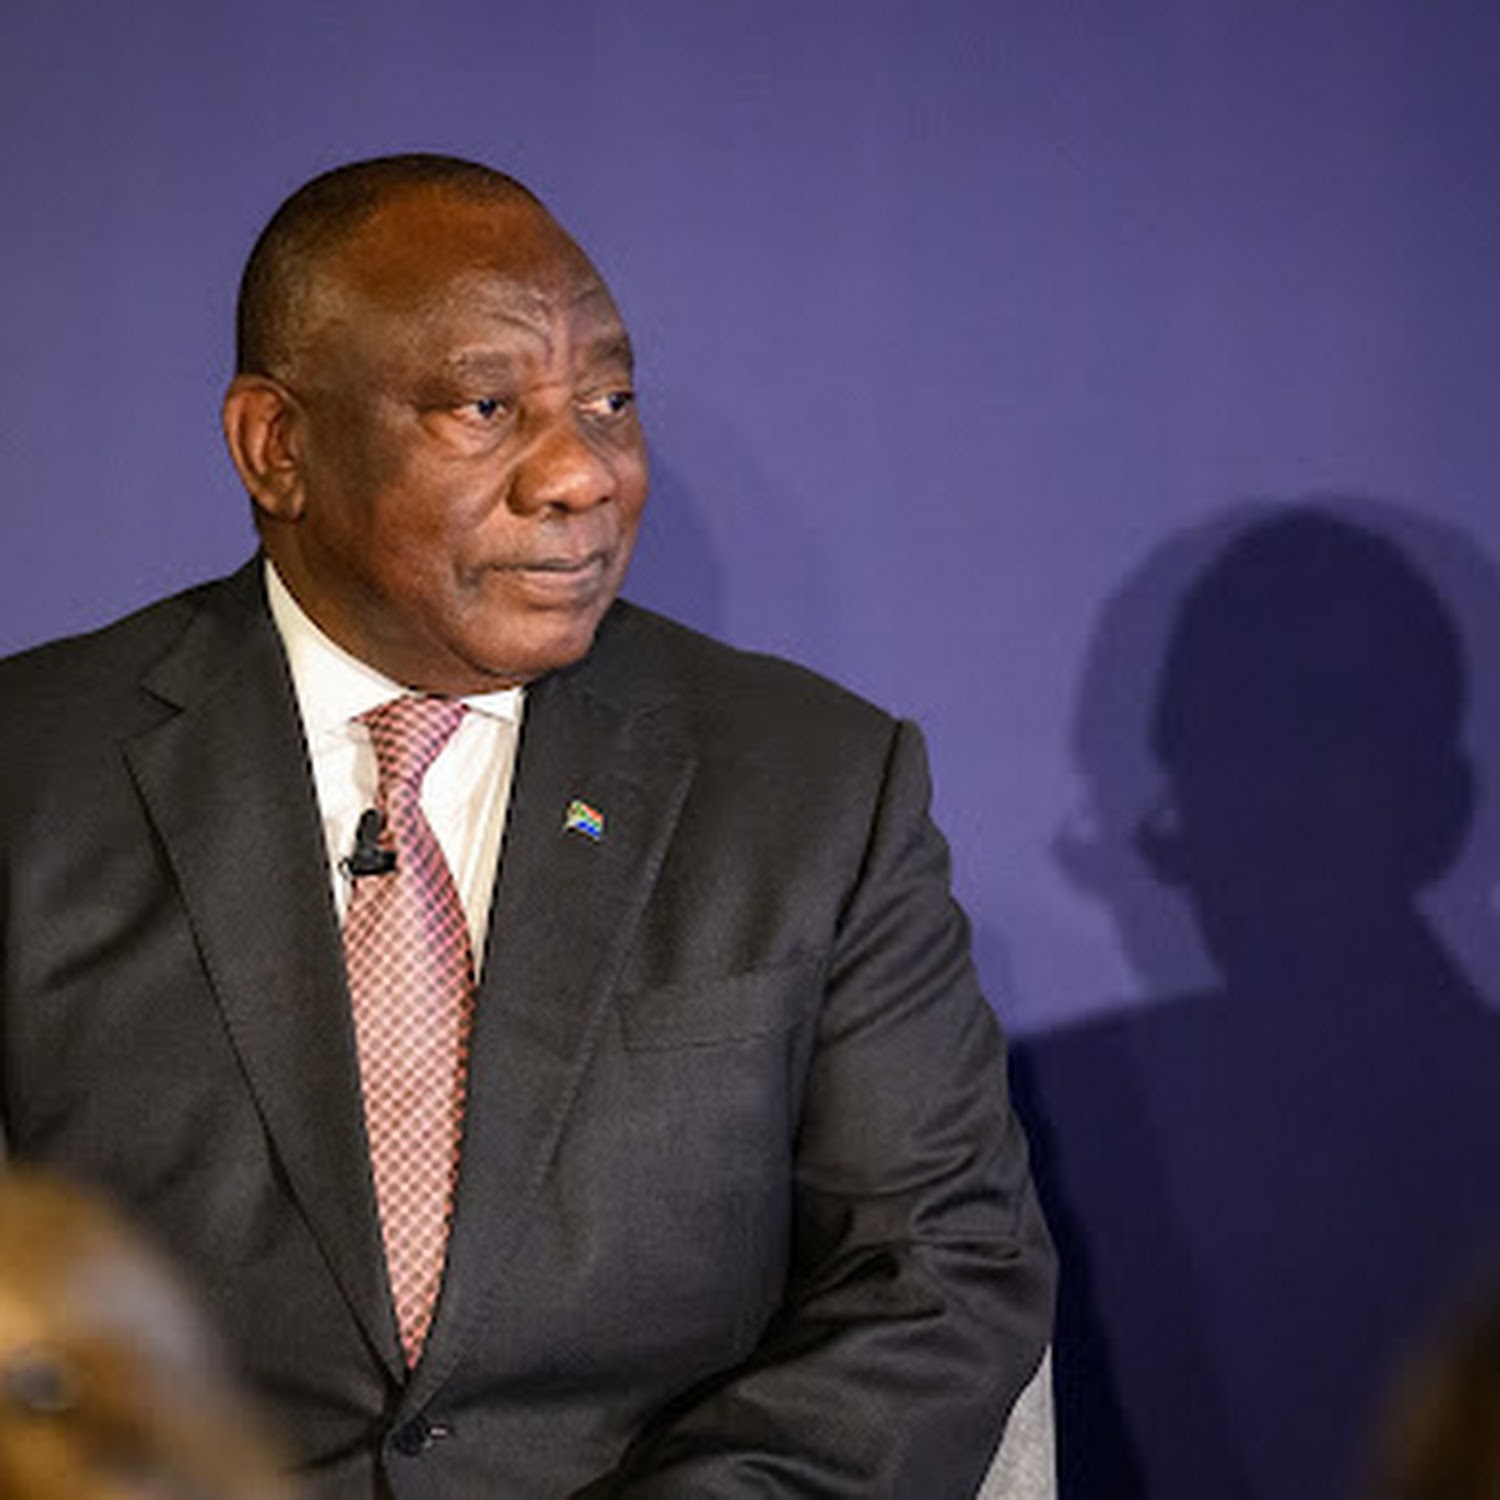 #PODCAST ANALYSIS: President Cyril Ramaphosa could reshuffle his cabinet before this week's State of the Nation Address (SONA) #sabcnews